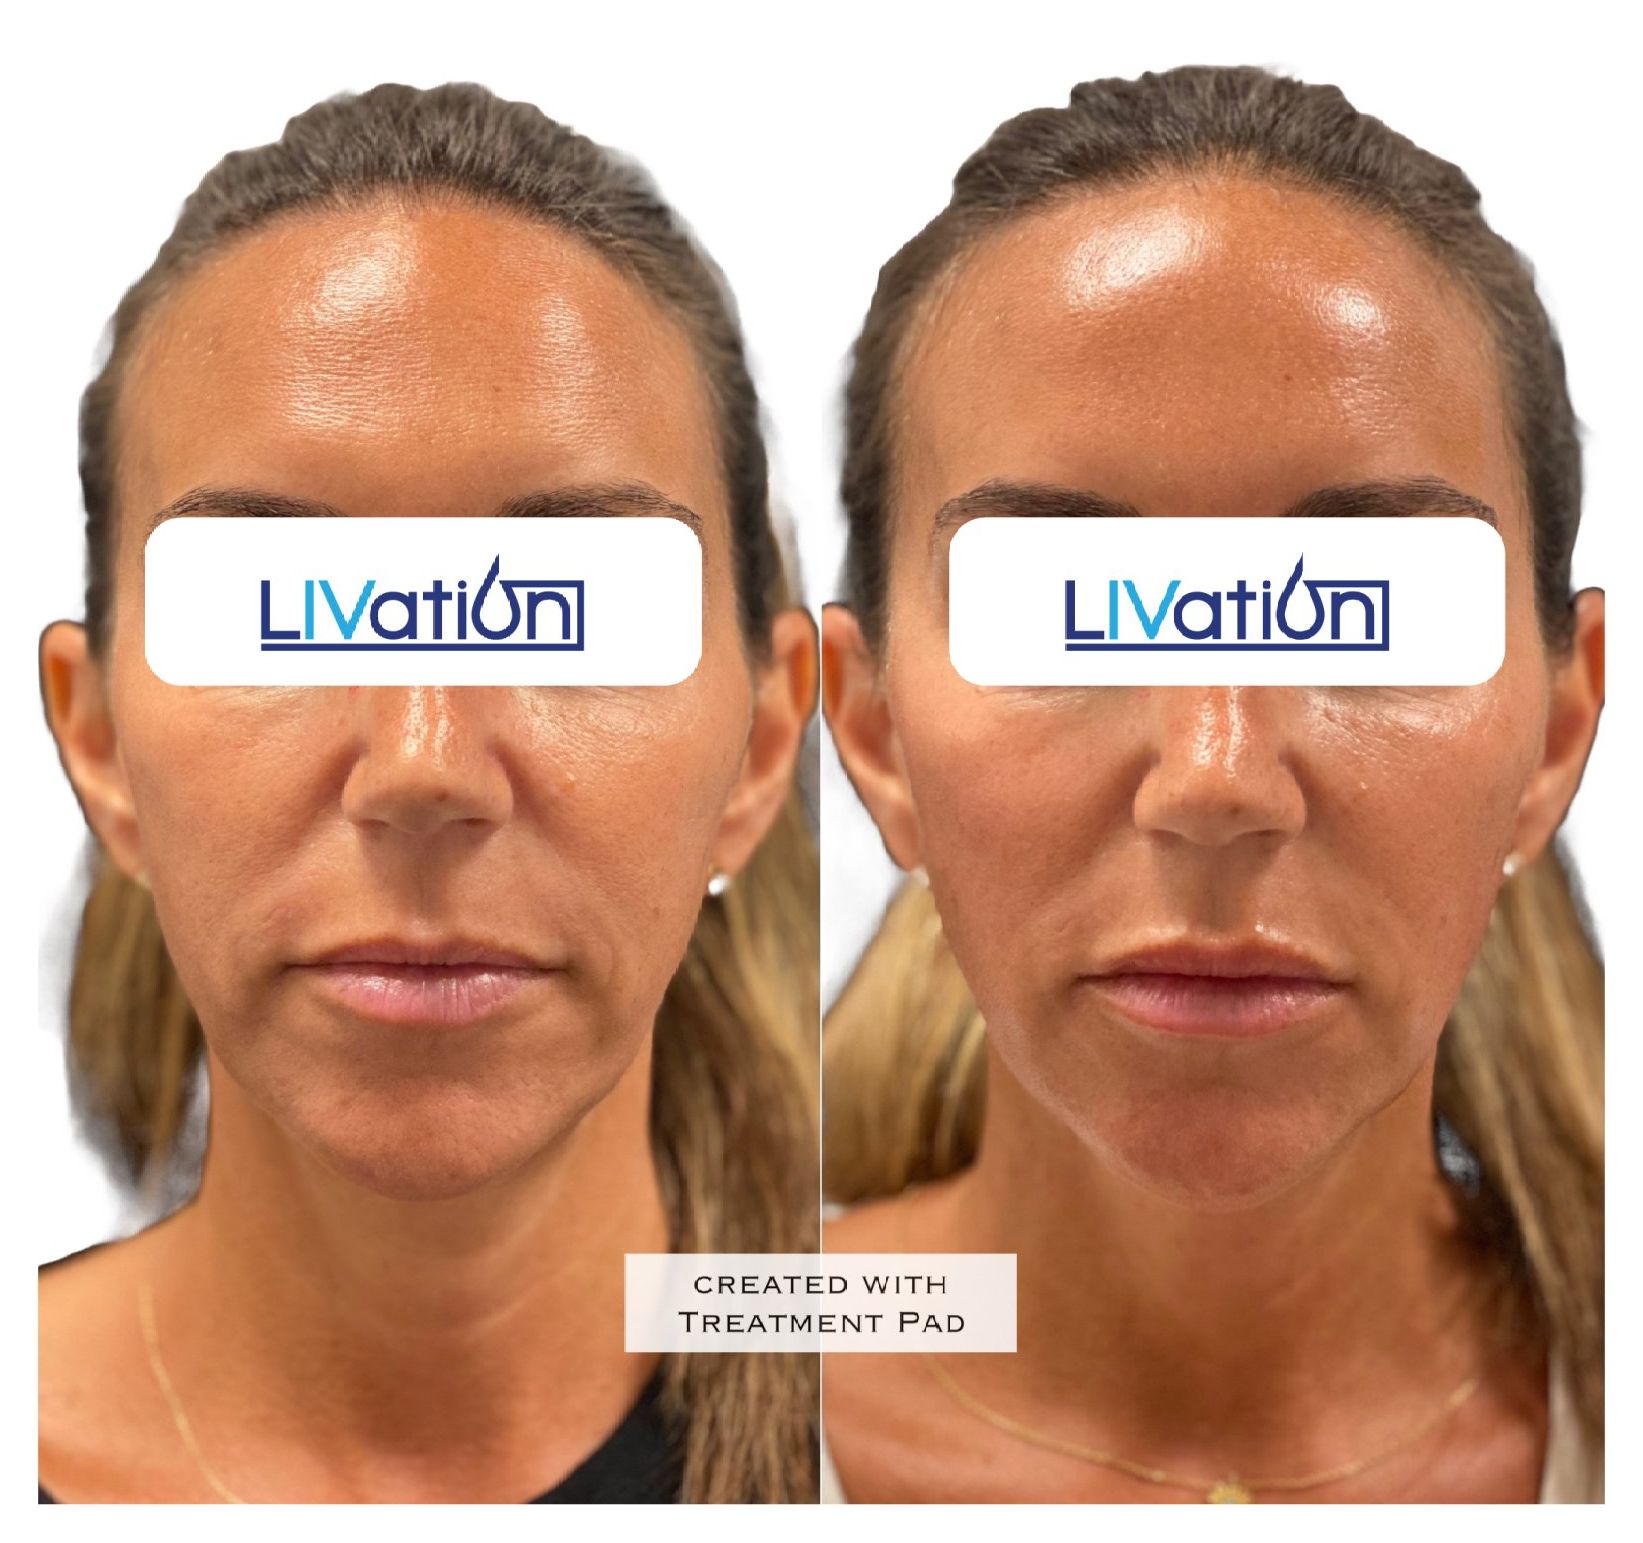 triLift Facelift Before & After 2